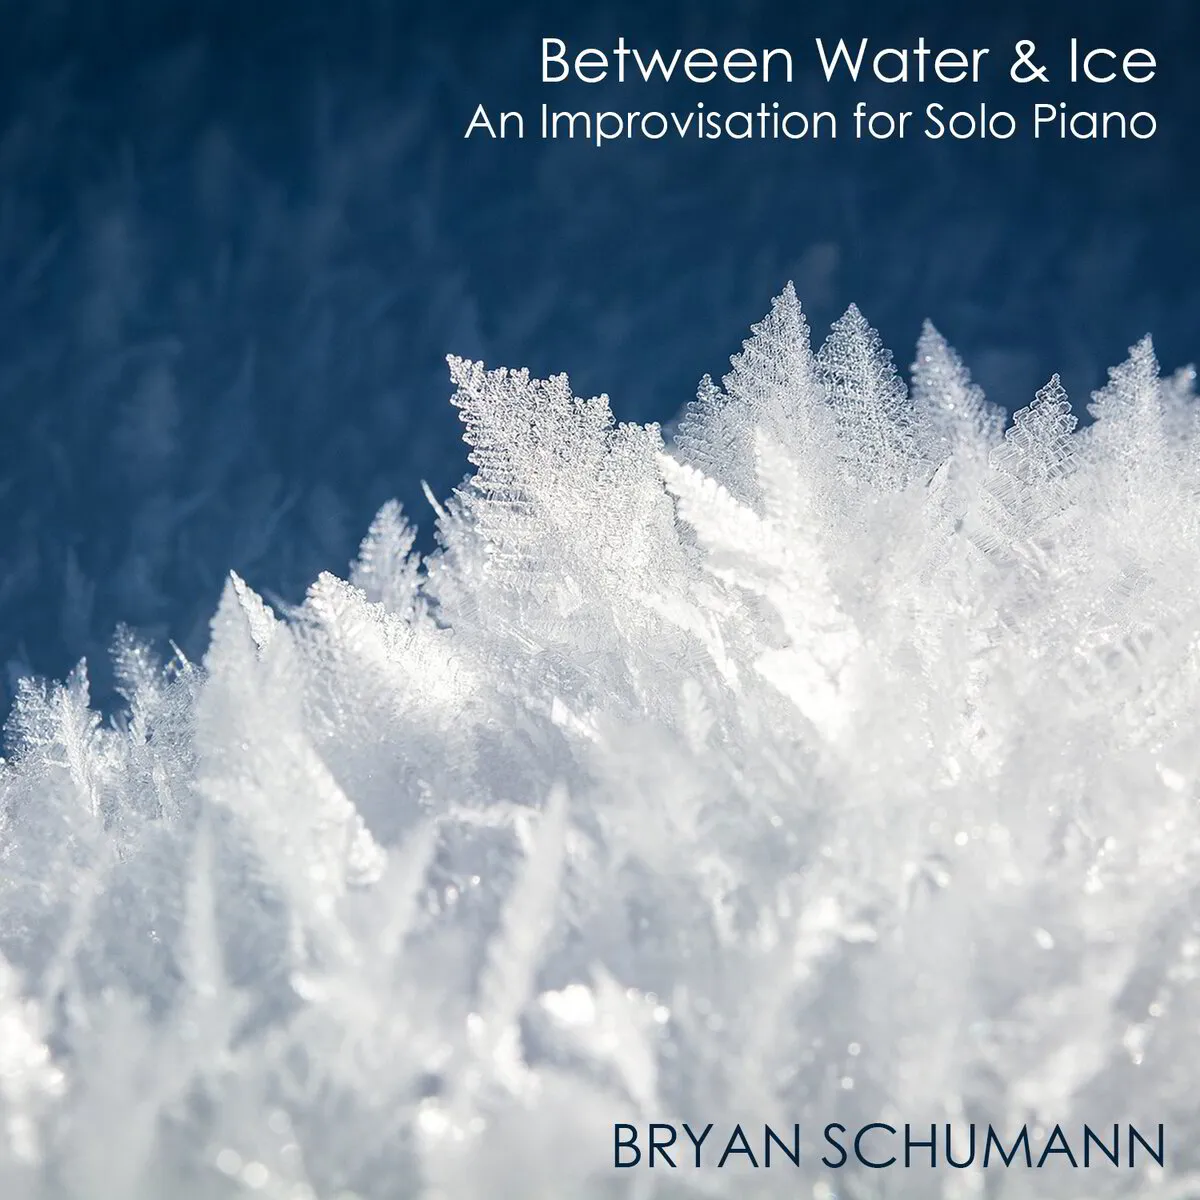 Between Water & Ice: An Improvisation for Solo Piano (audio download)